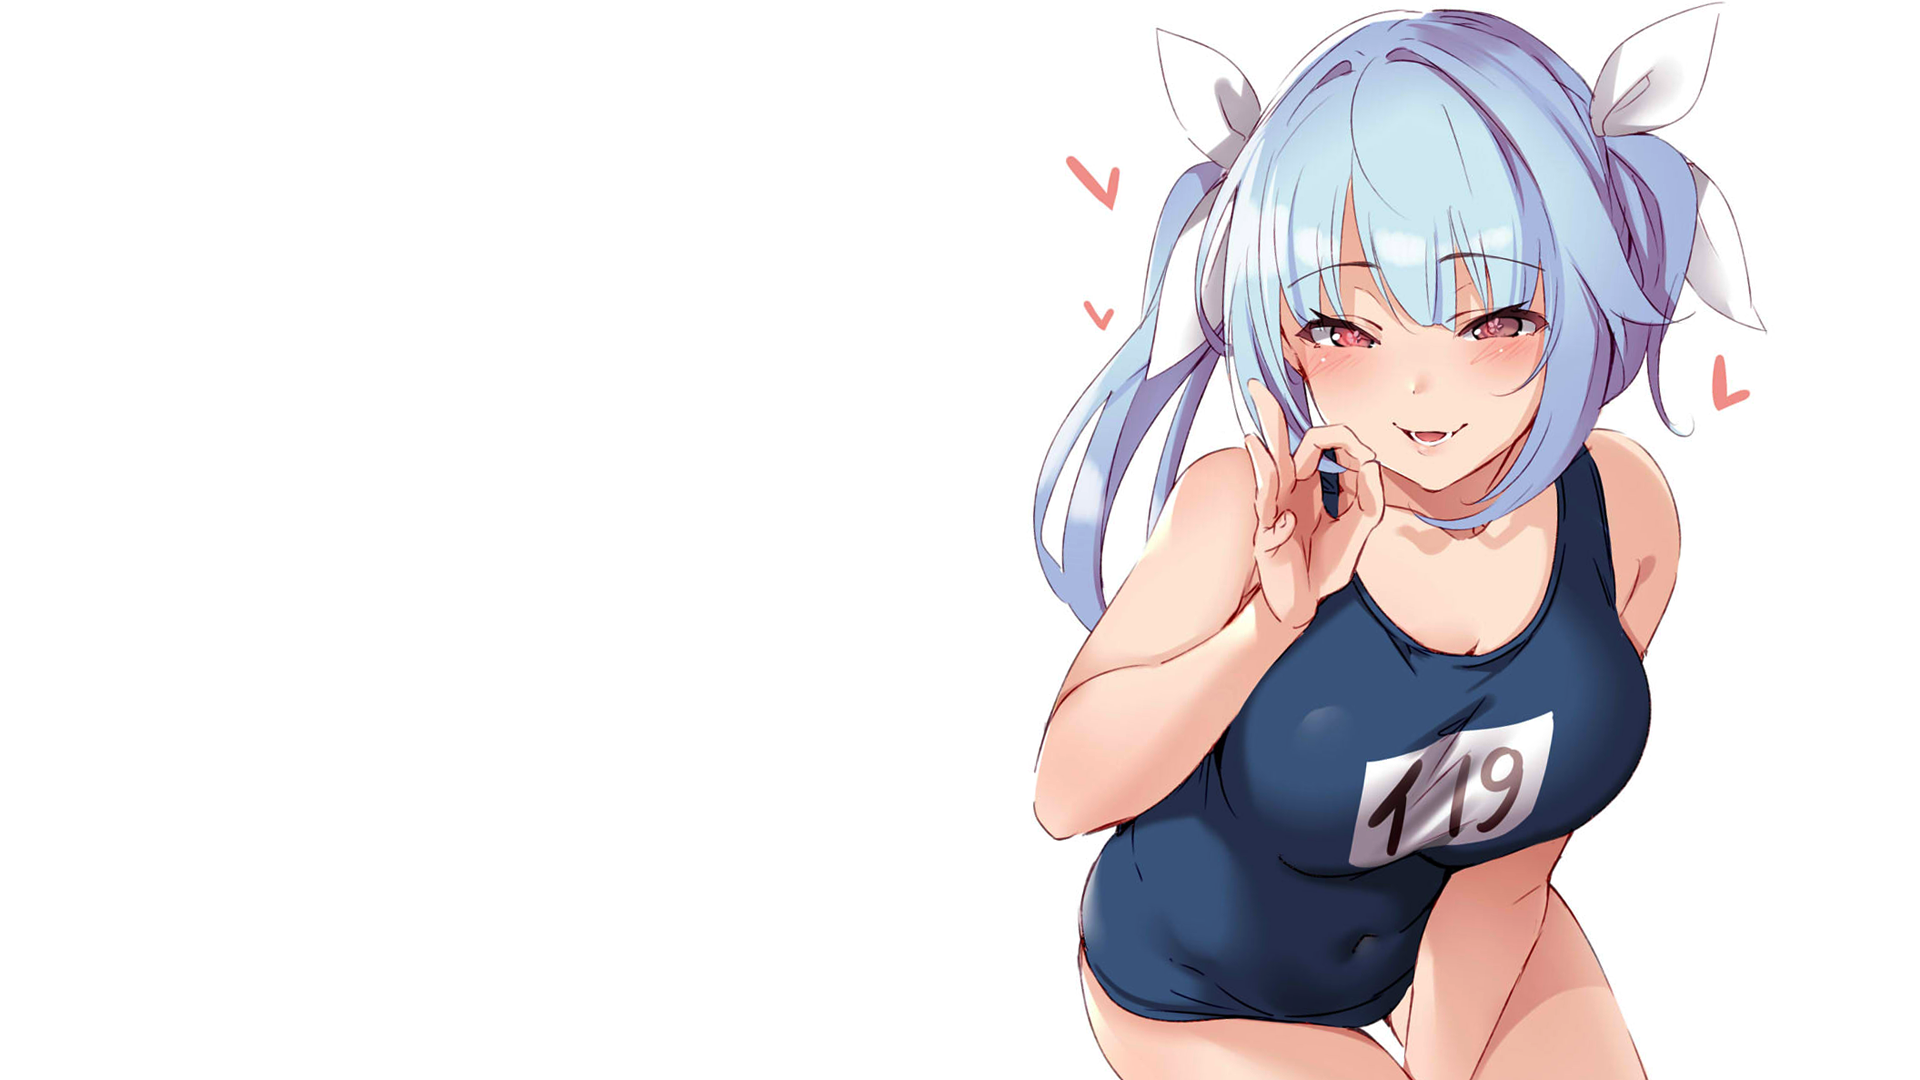 Anime 1920x1080 anime anime girls simple background white background ecchi Kantai Collection I-19 (KanColle)  big boobs schoolgirl thighs thigh-highs one-piece swimsuit swimwear the gap looking at viewer school swimsuits hand gesture suggestive heart (design) blushing smiling OK sign